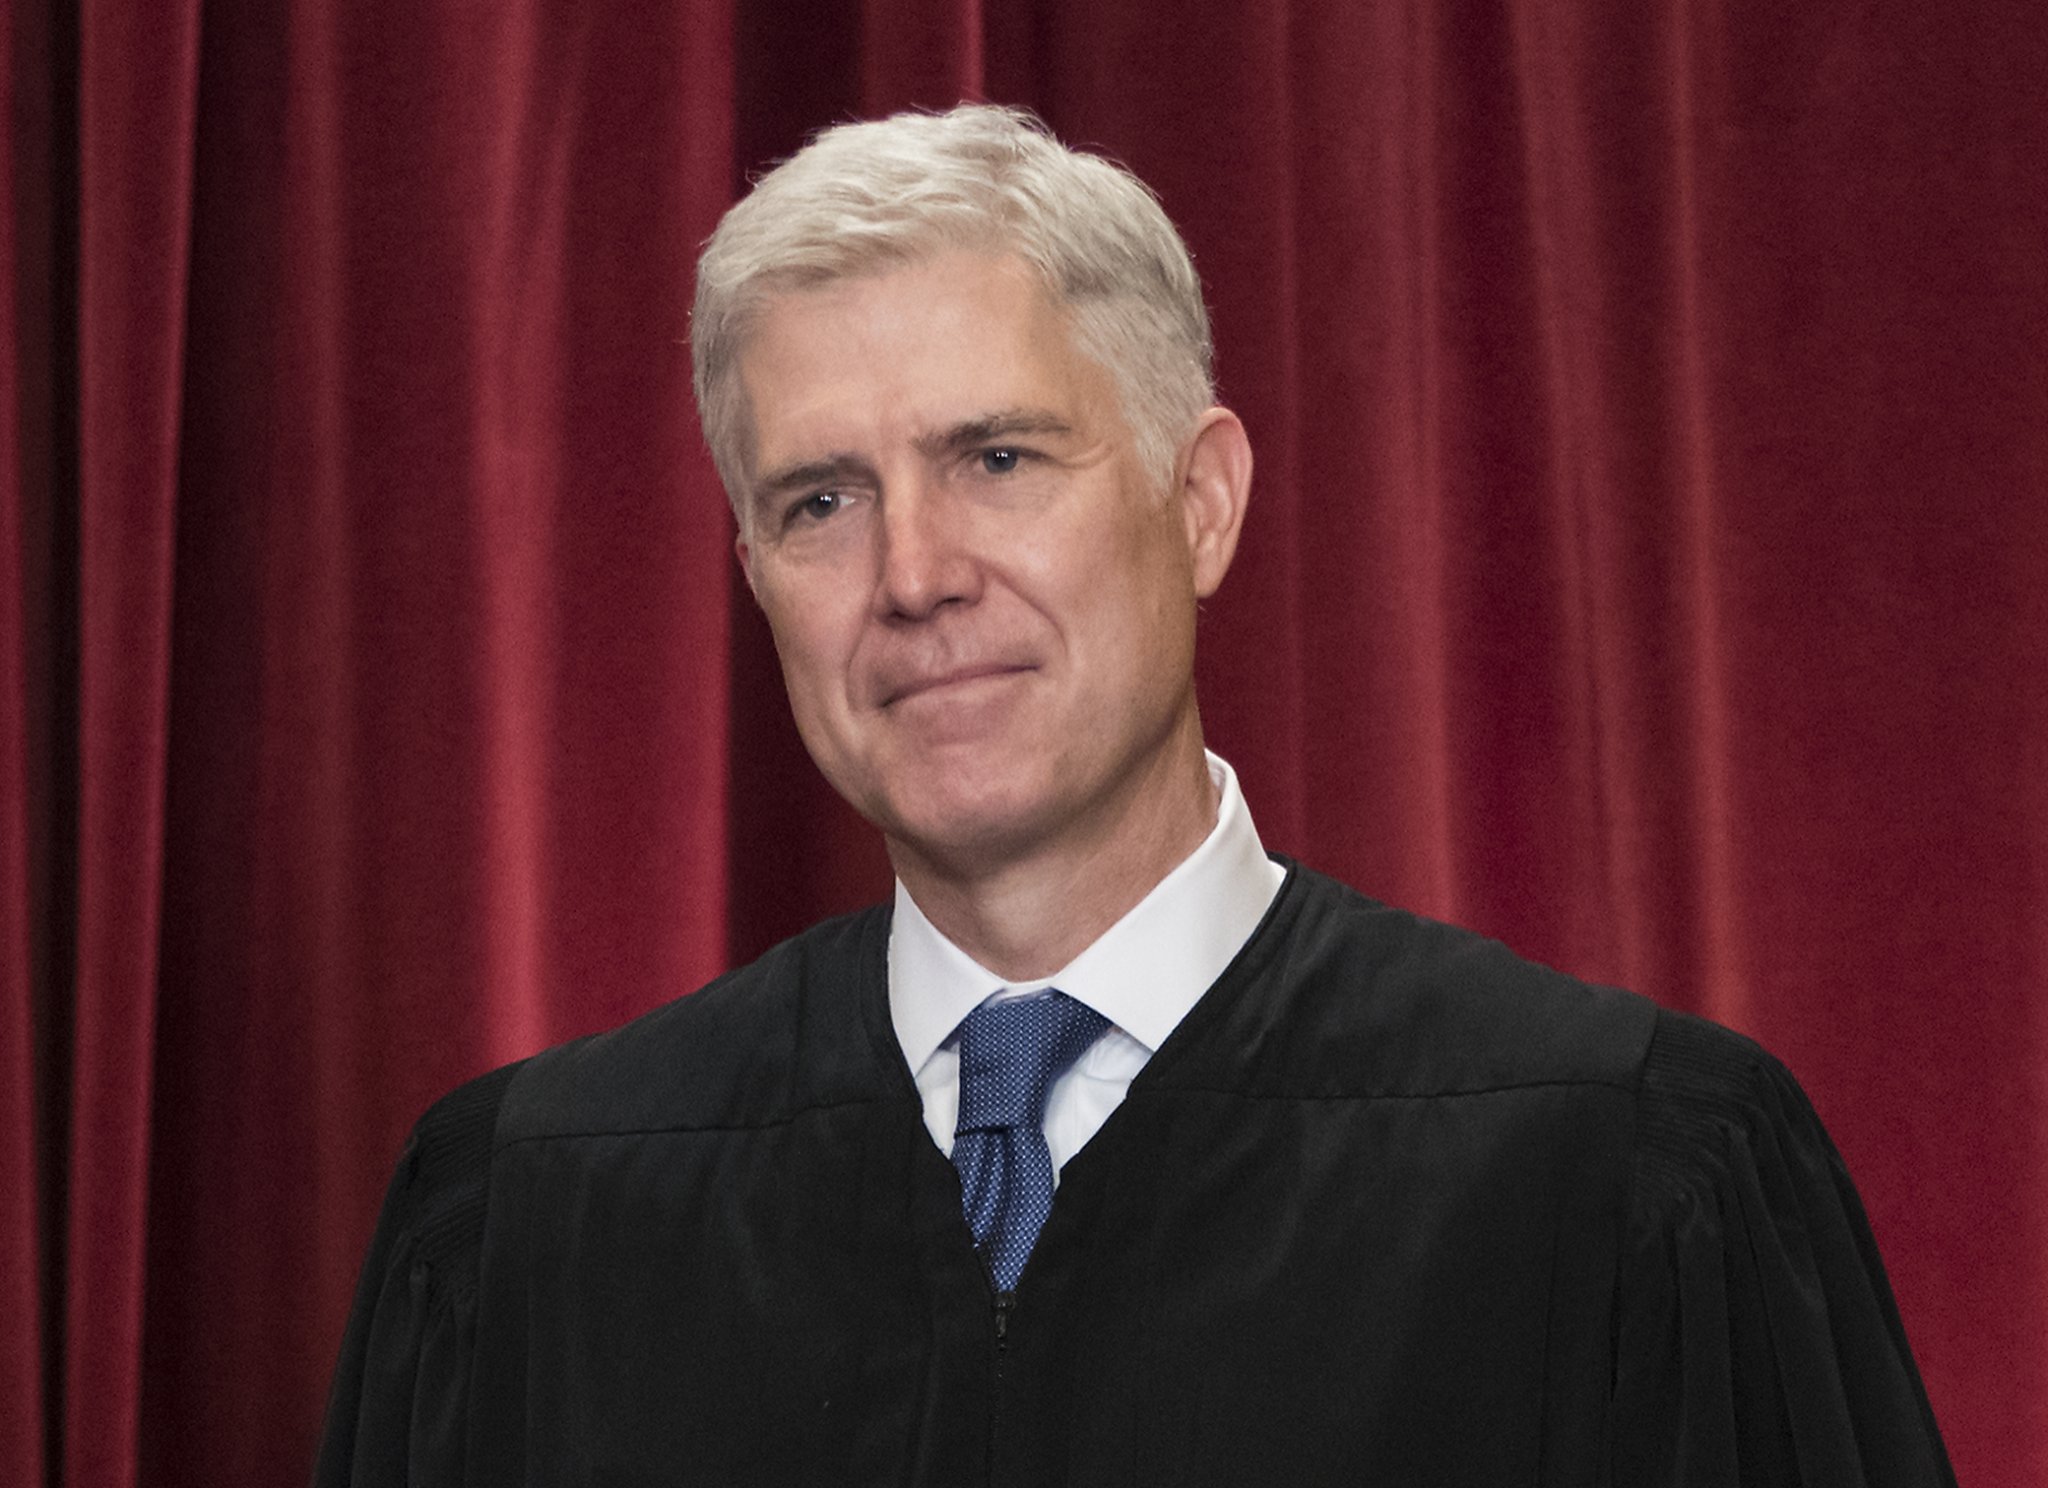 Justice Gorsuch makes conservative mark in 4 Supreme Court cases - San Francisco Chronicle